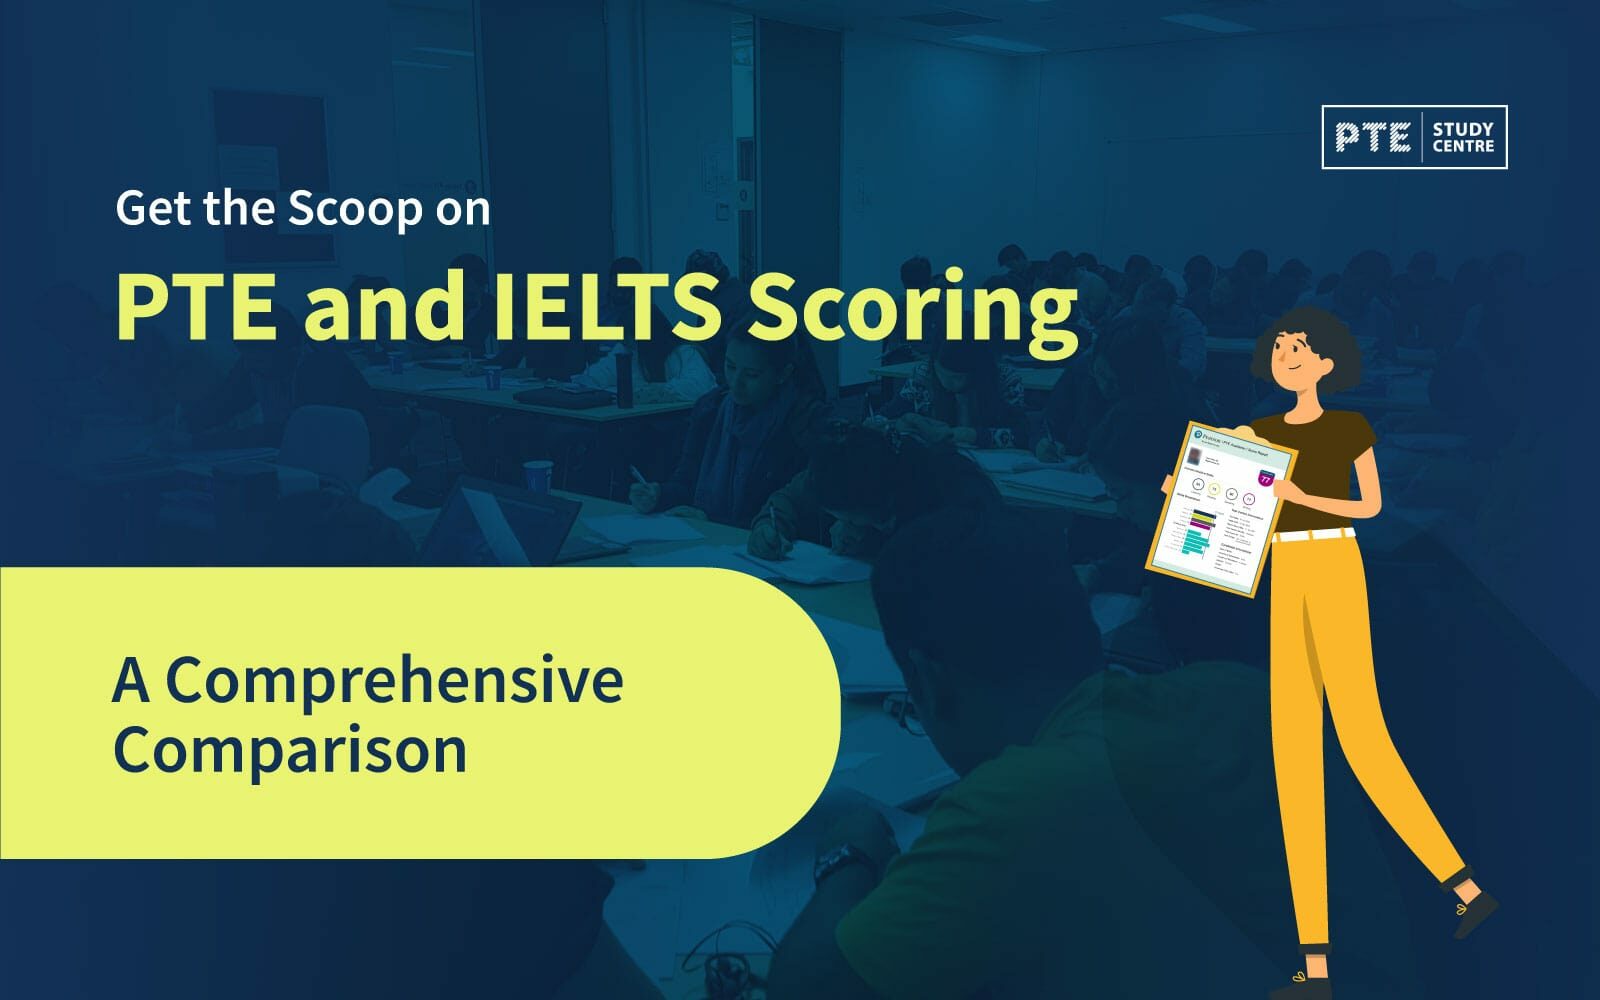 Get the Scoop on PTE and IELTS Scoring: A Comprehensive Comparison image